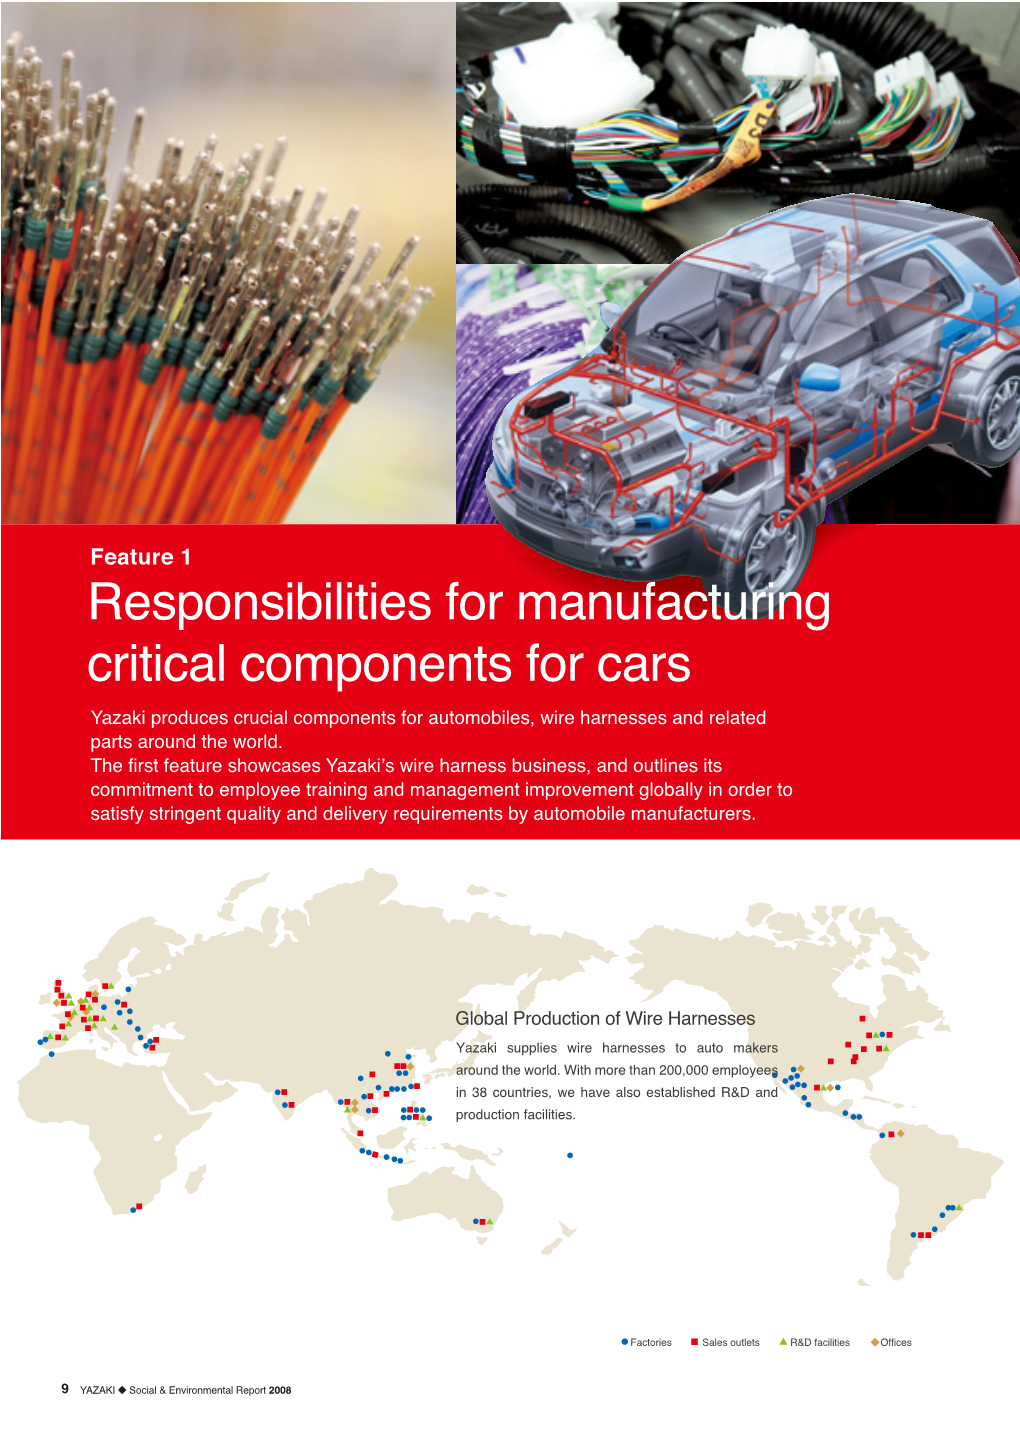 Responsibilities for Manufacturing Critical Components for Cars Yazaki Produces Crucial Components for Automobiles, Wire Harnesses and Related Parts Around the World